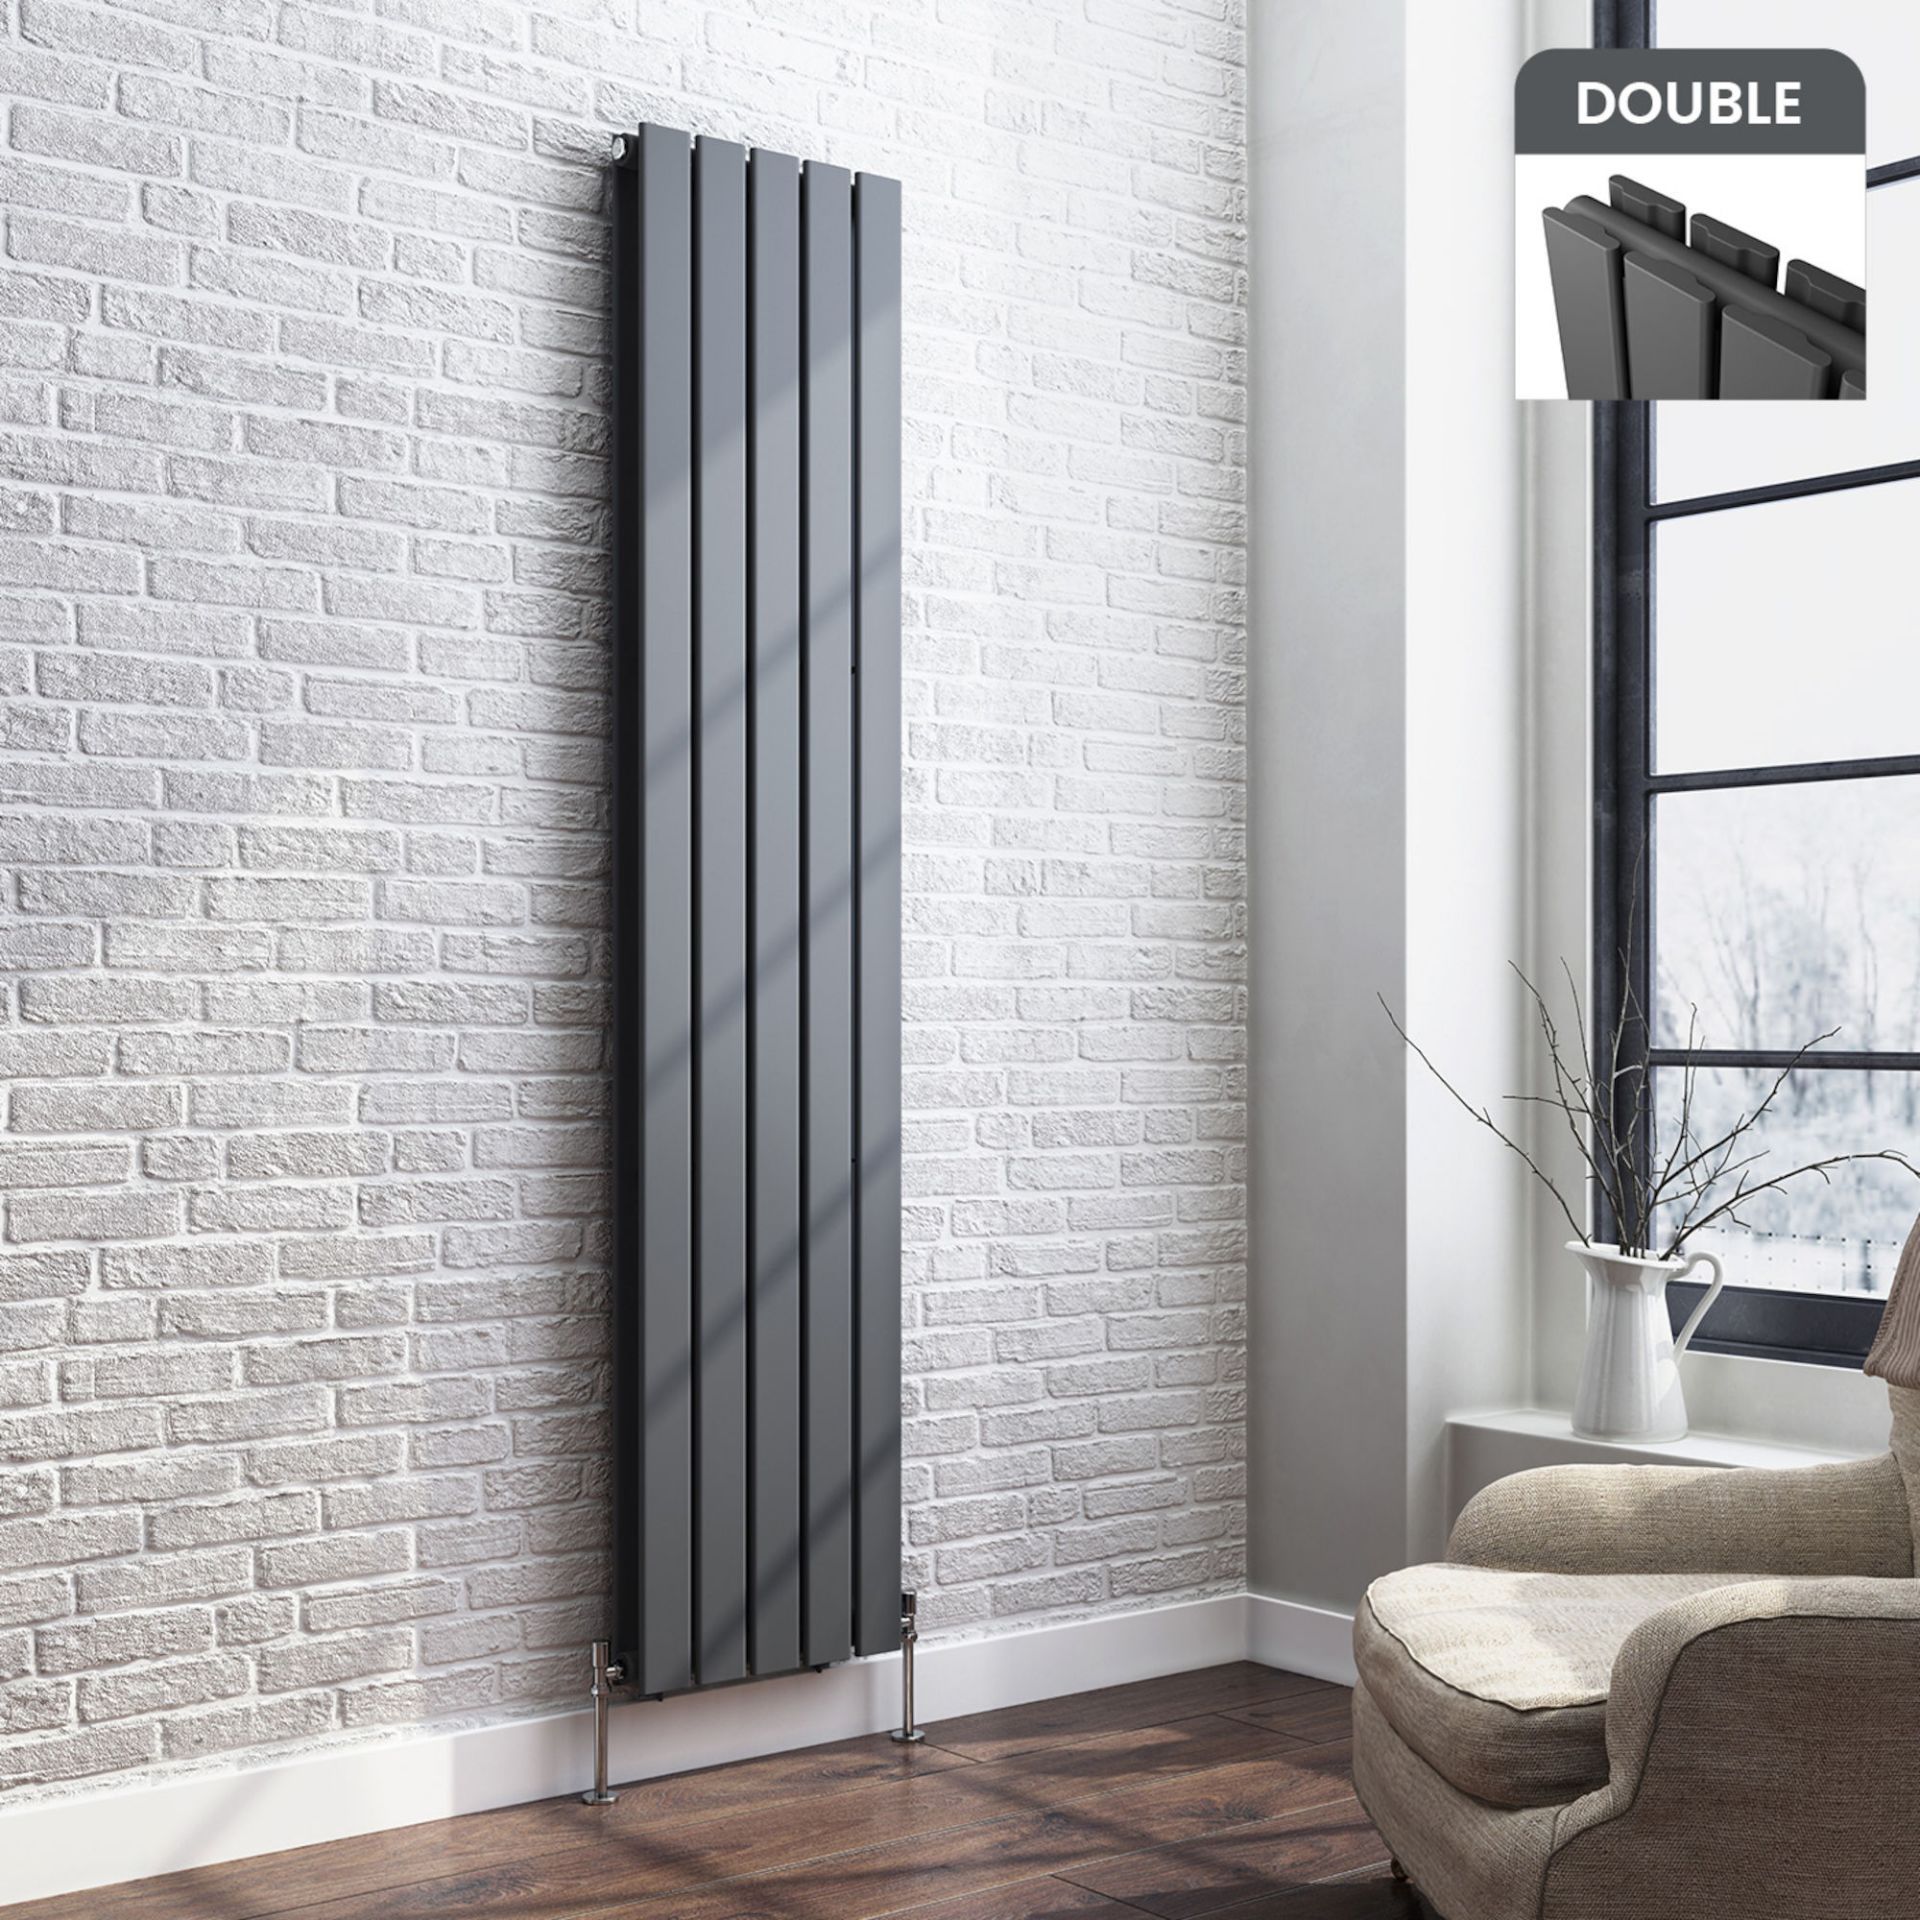 1800x360mm Anthracite Double Flat Panel Vertical Radiator. RRP £444.99. Made with low carbon steel